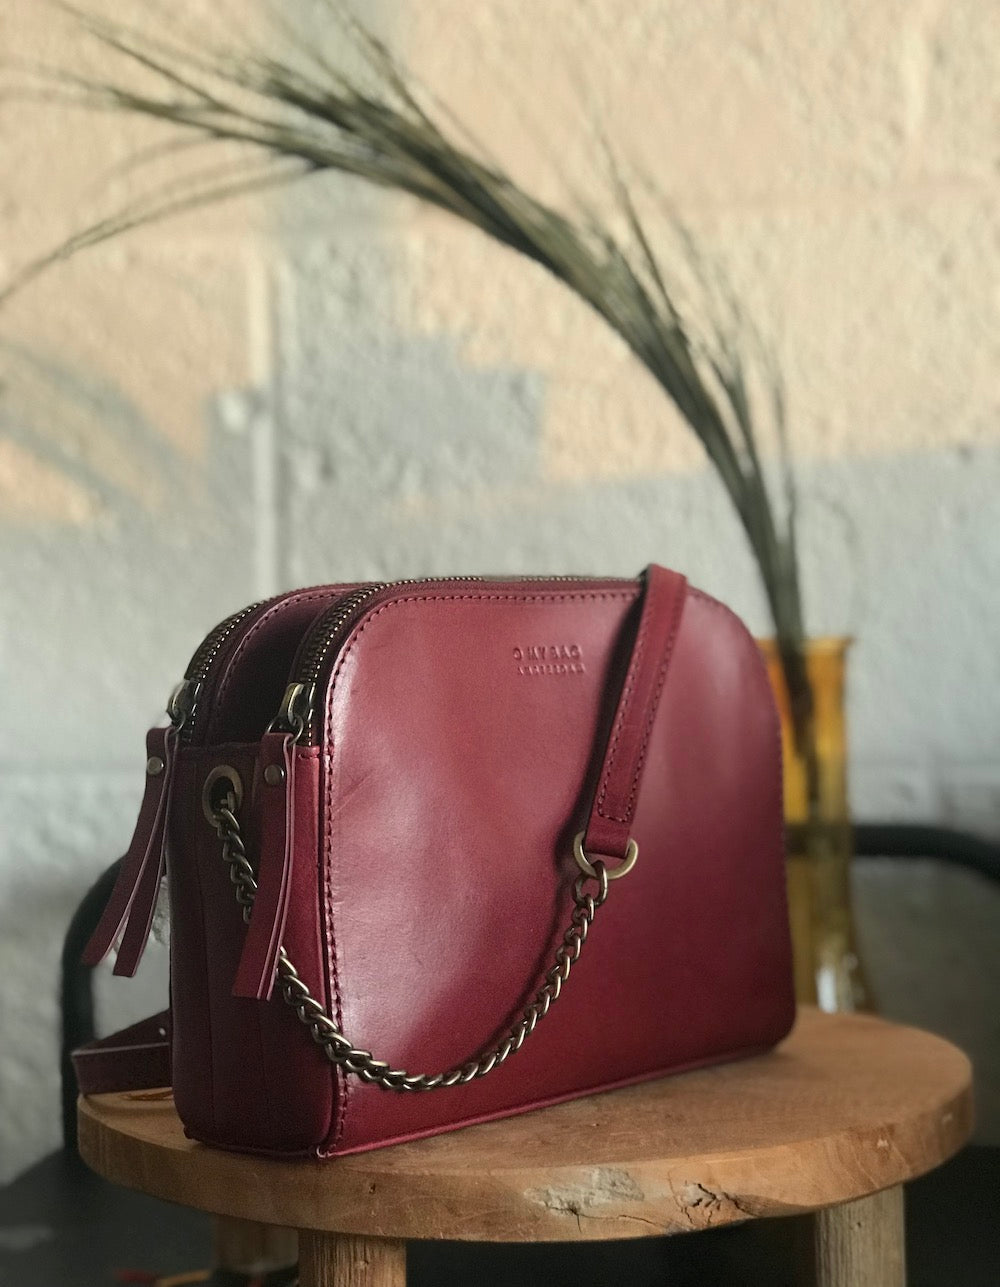 Ruby Leather womens handbag. Square shape with an adjustable leather & chain strap. Lifestyle image.